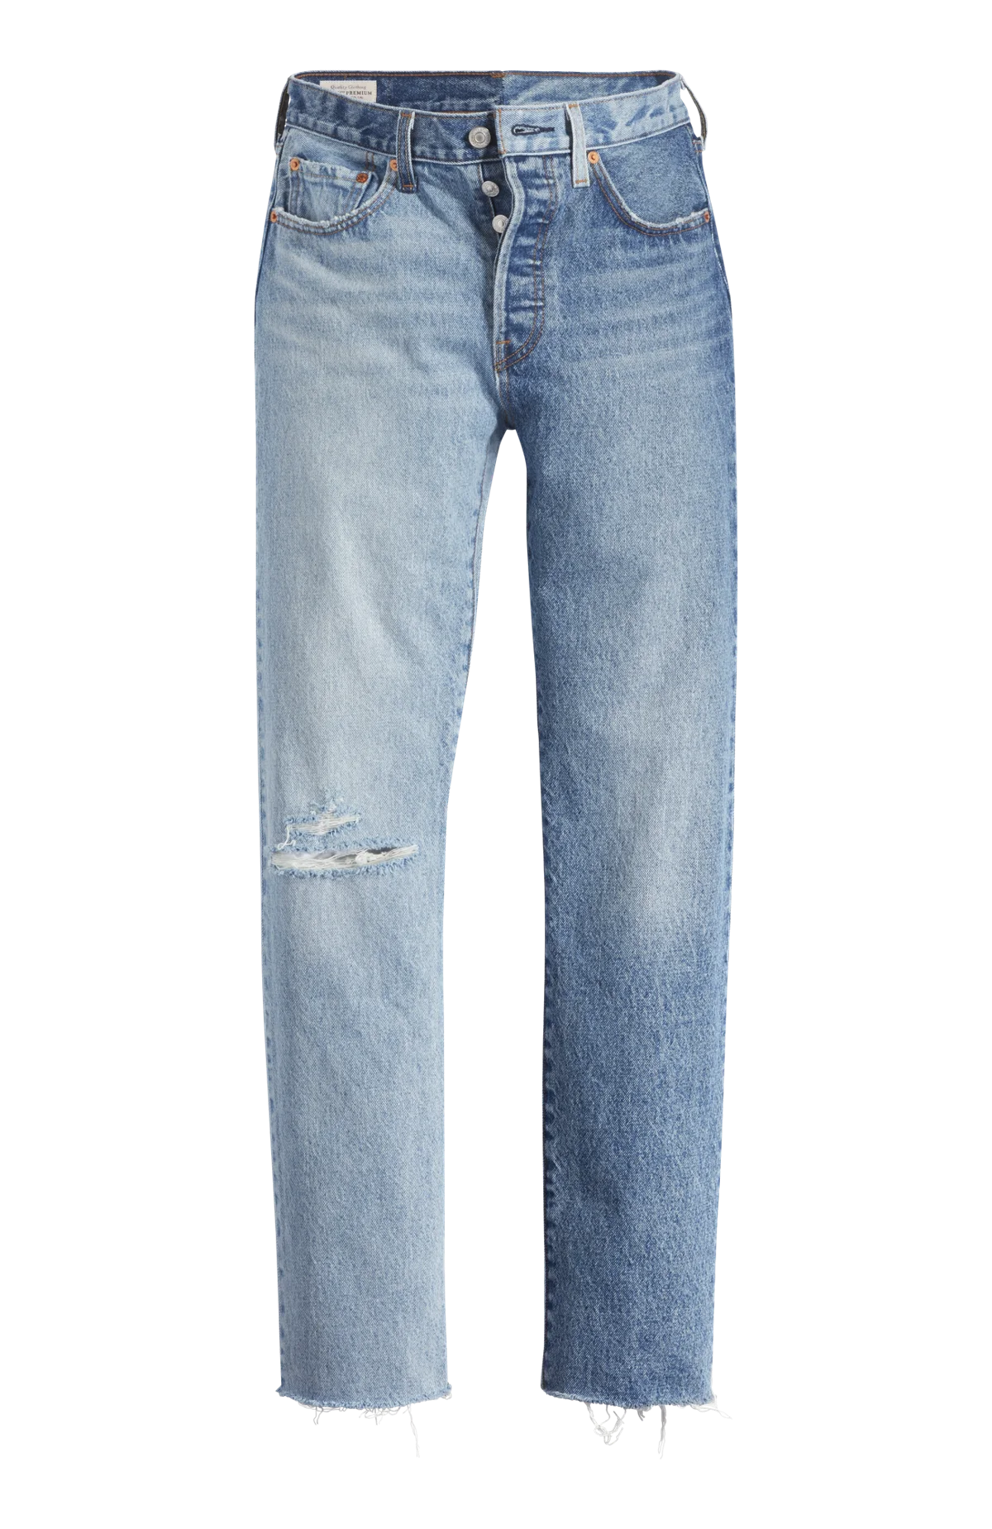 LEVIS_501Jeans_A5313-0000_TWO TONE INDIGO_WOMENS_Front_€129.95.png